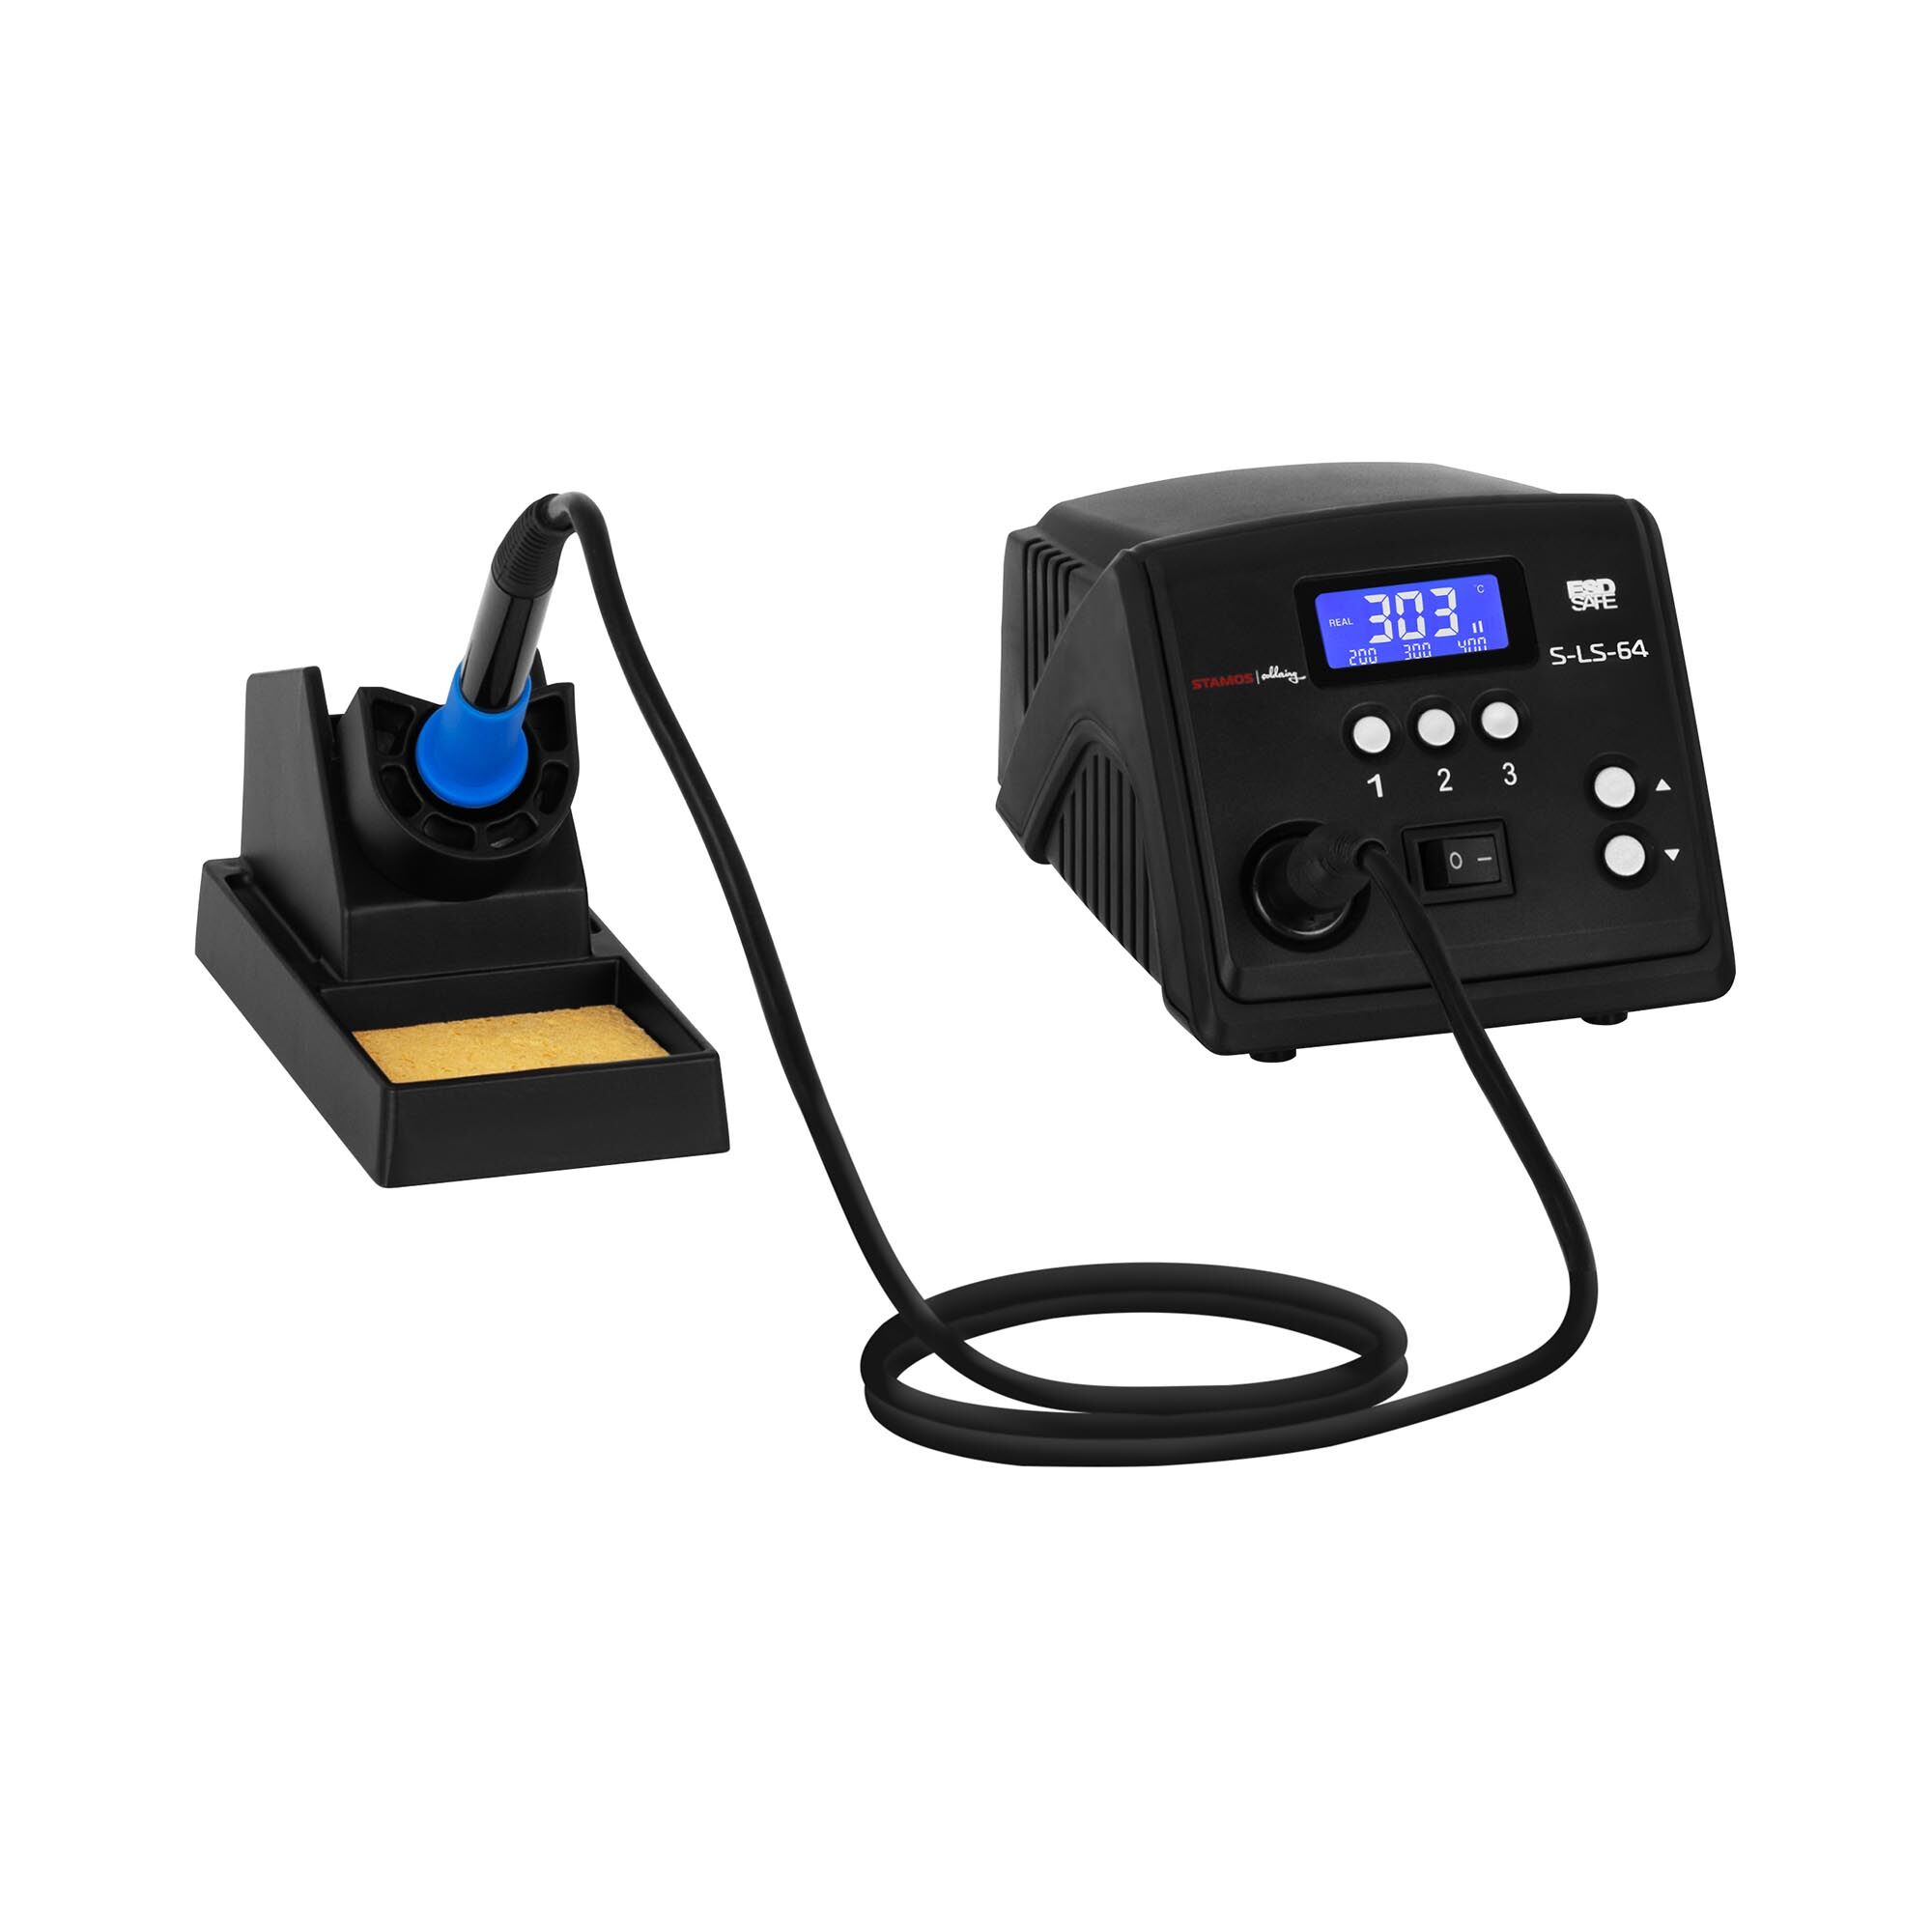 Stamos Soldering Soldering Station - digital - with soldering iron and holder - 80 W - LCD S-LS-64